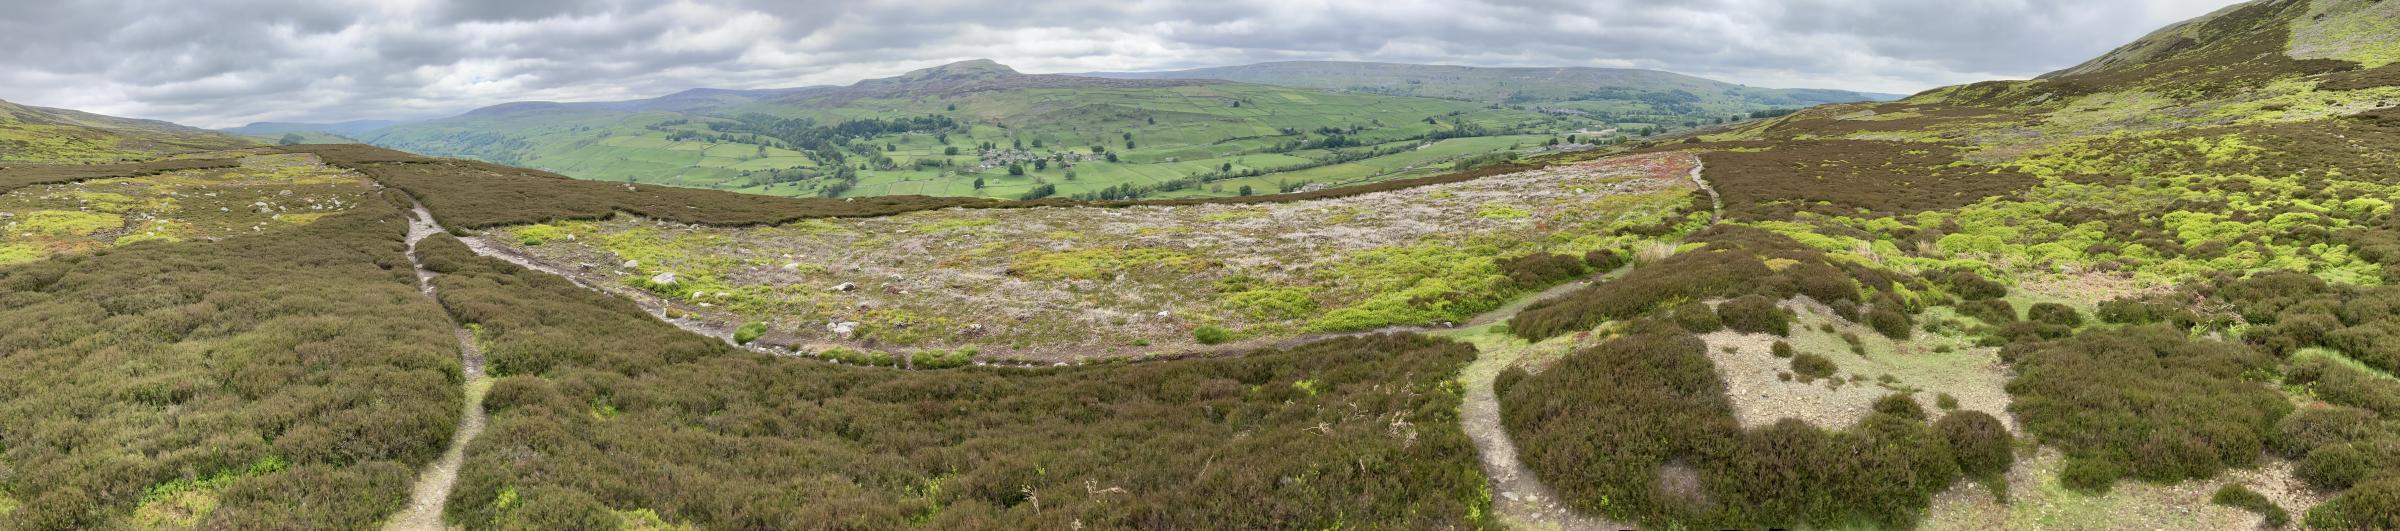 The Iron Age fort of Maiden Castle in Swaledale is the light patch of ground in the centre of this picture. It is surrounded by deep trenches